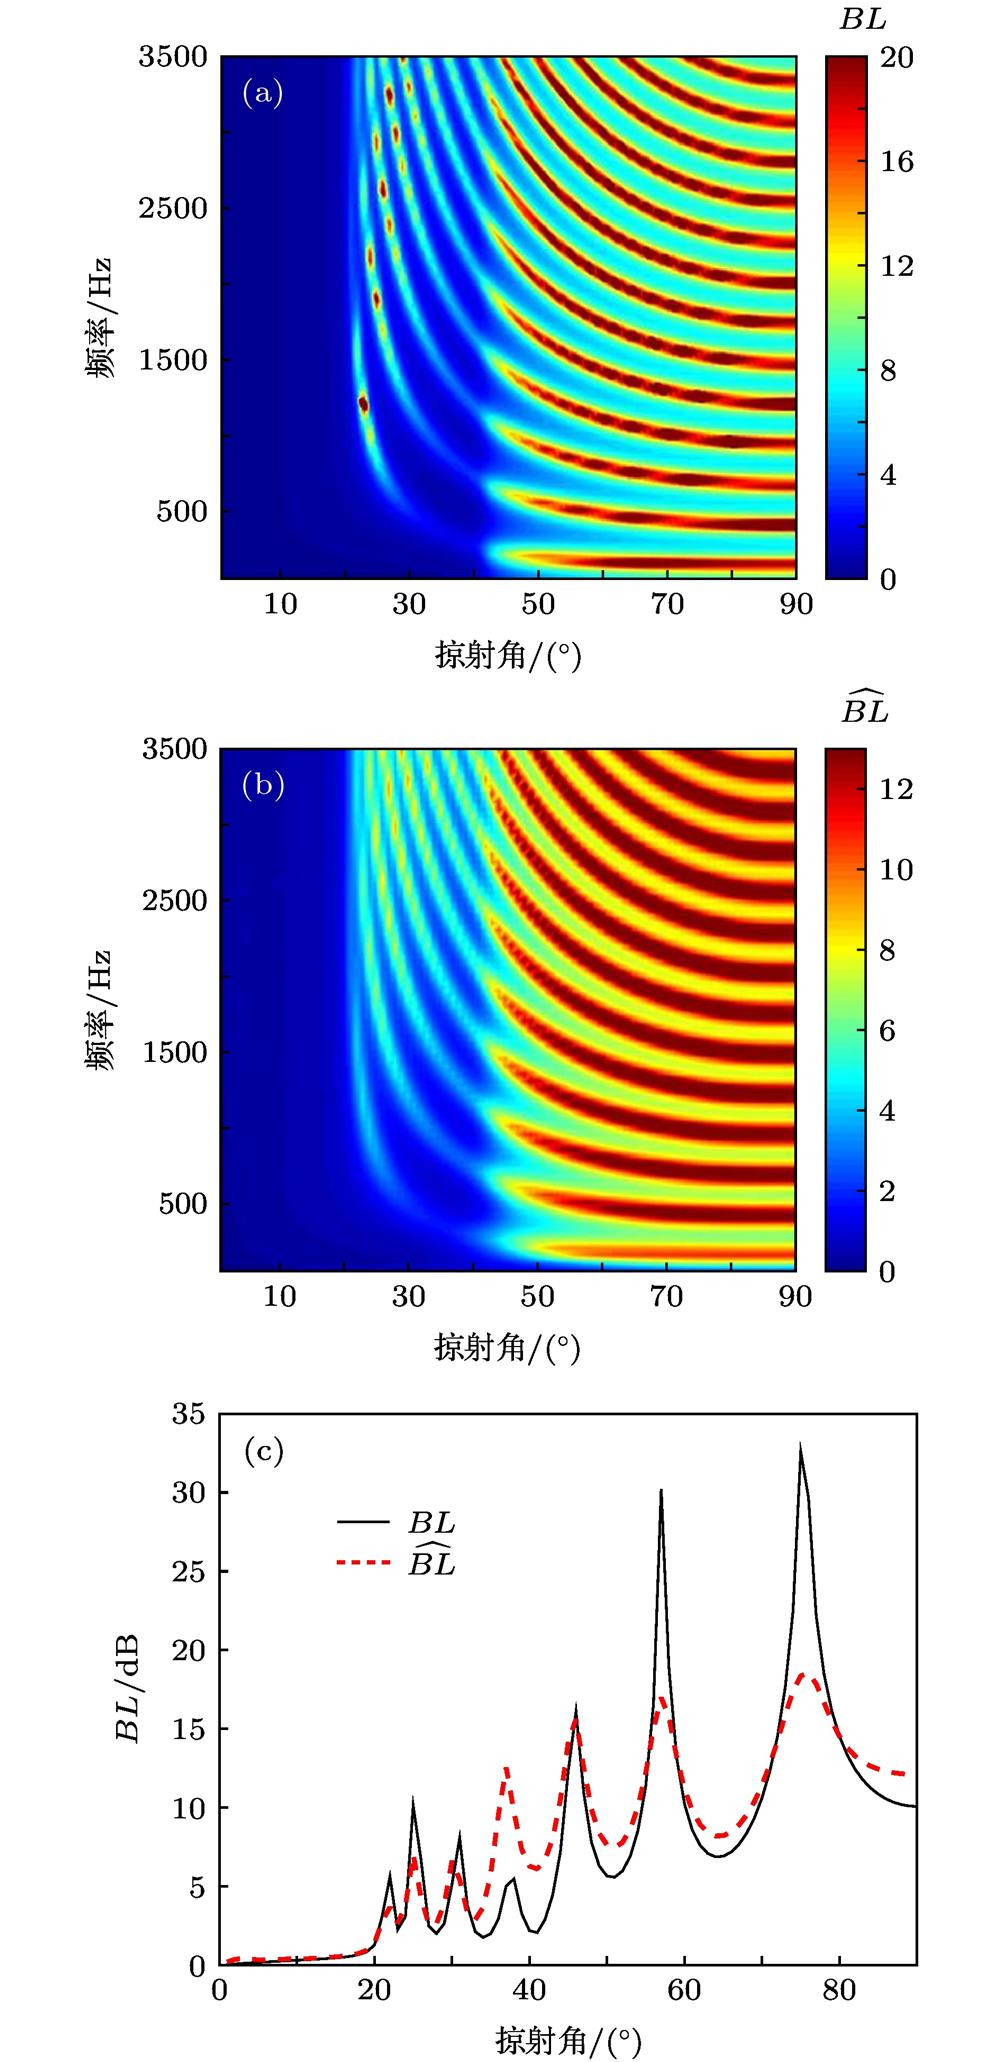 (a) True BL; (b) computed by vertical directionality of ocean ambient noise using OASN; (c) two methods compare under 1800 Hz, the full line is BL, the imaginary line is (a) 真实反射损失BL; (b) 根据噪声垂直空间指向性利用OASN模块仿真得到的; (c) 1800 Hz下两种方法的比较, 实线为BL, 虚线为